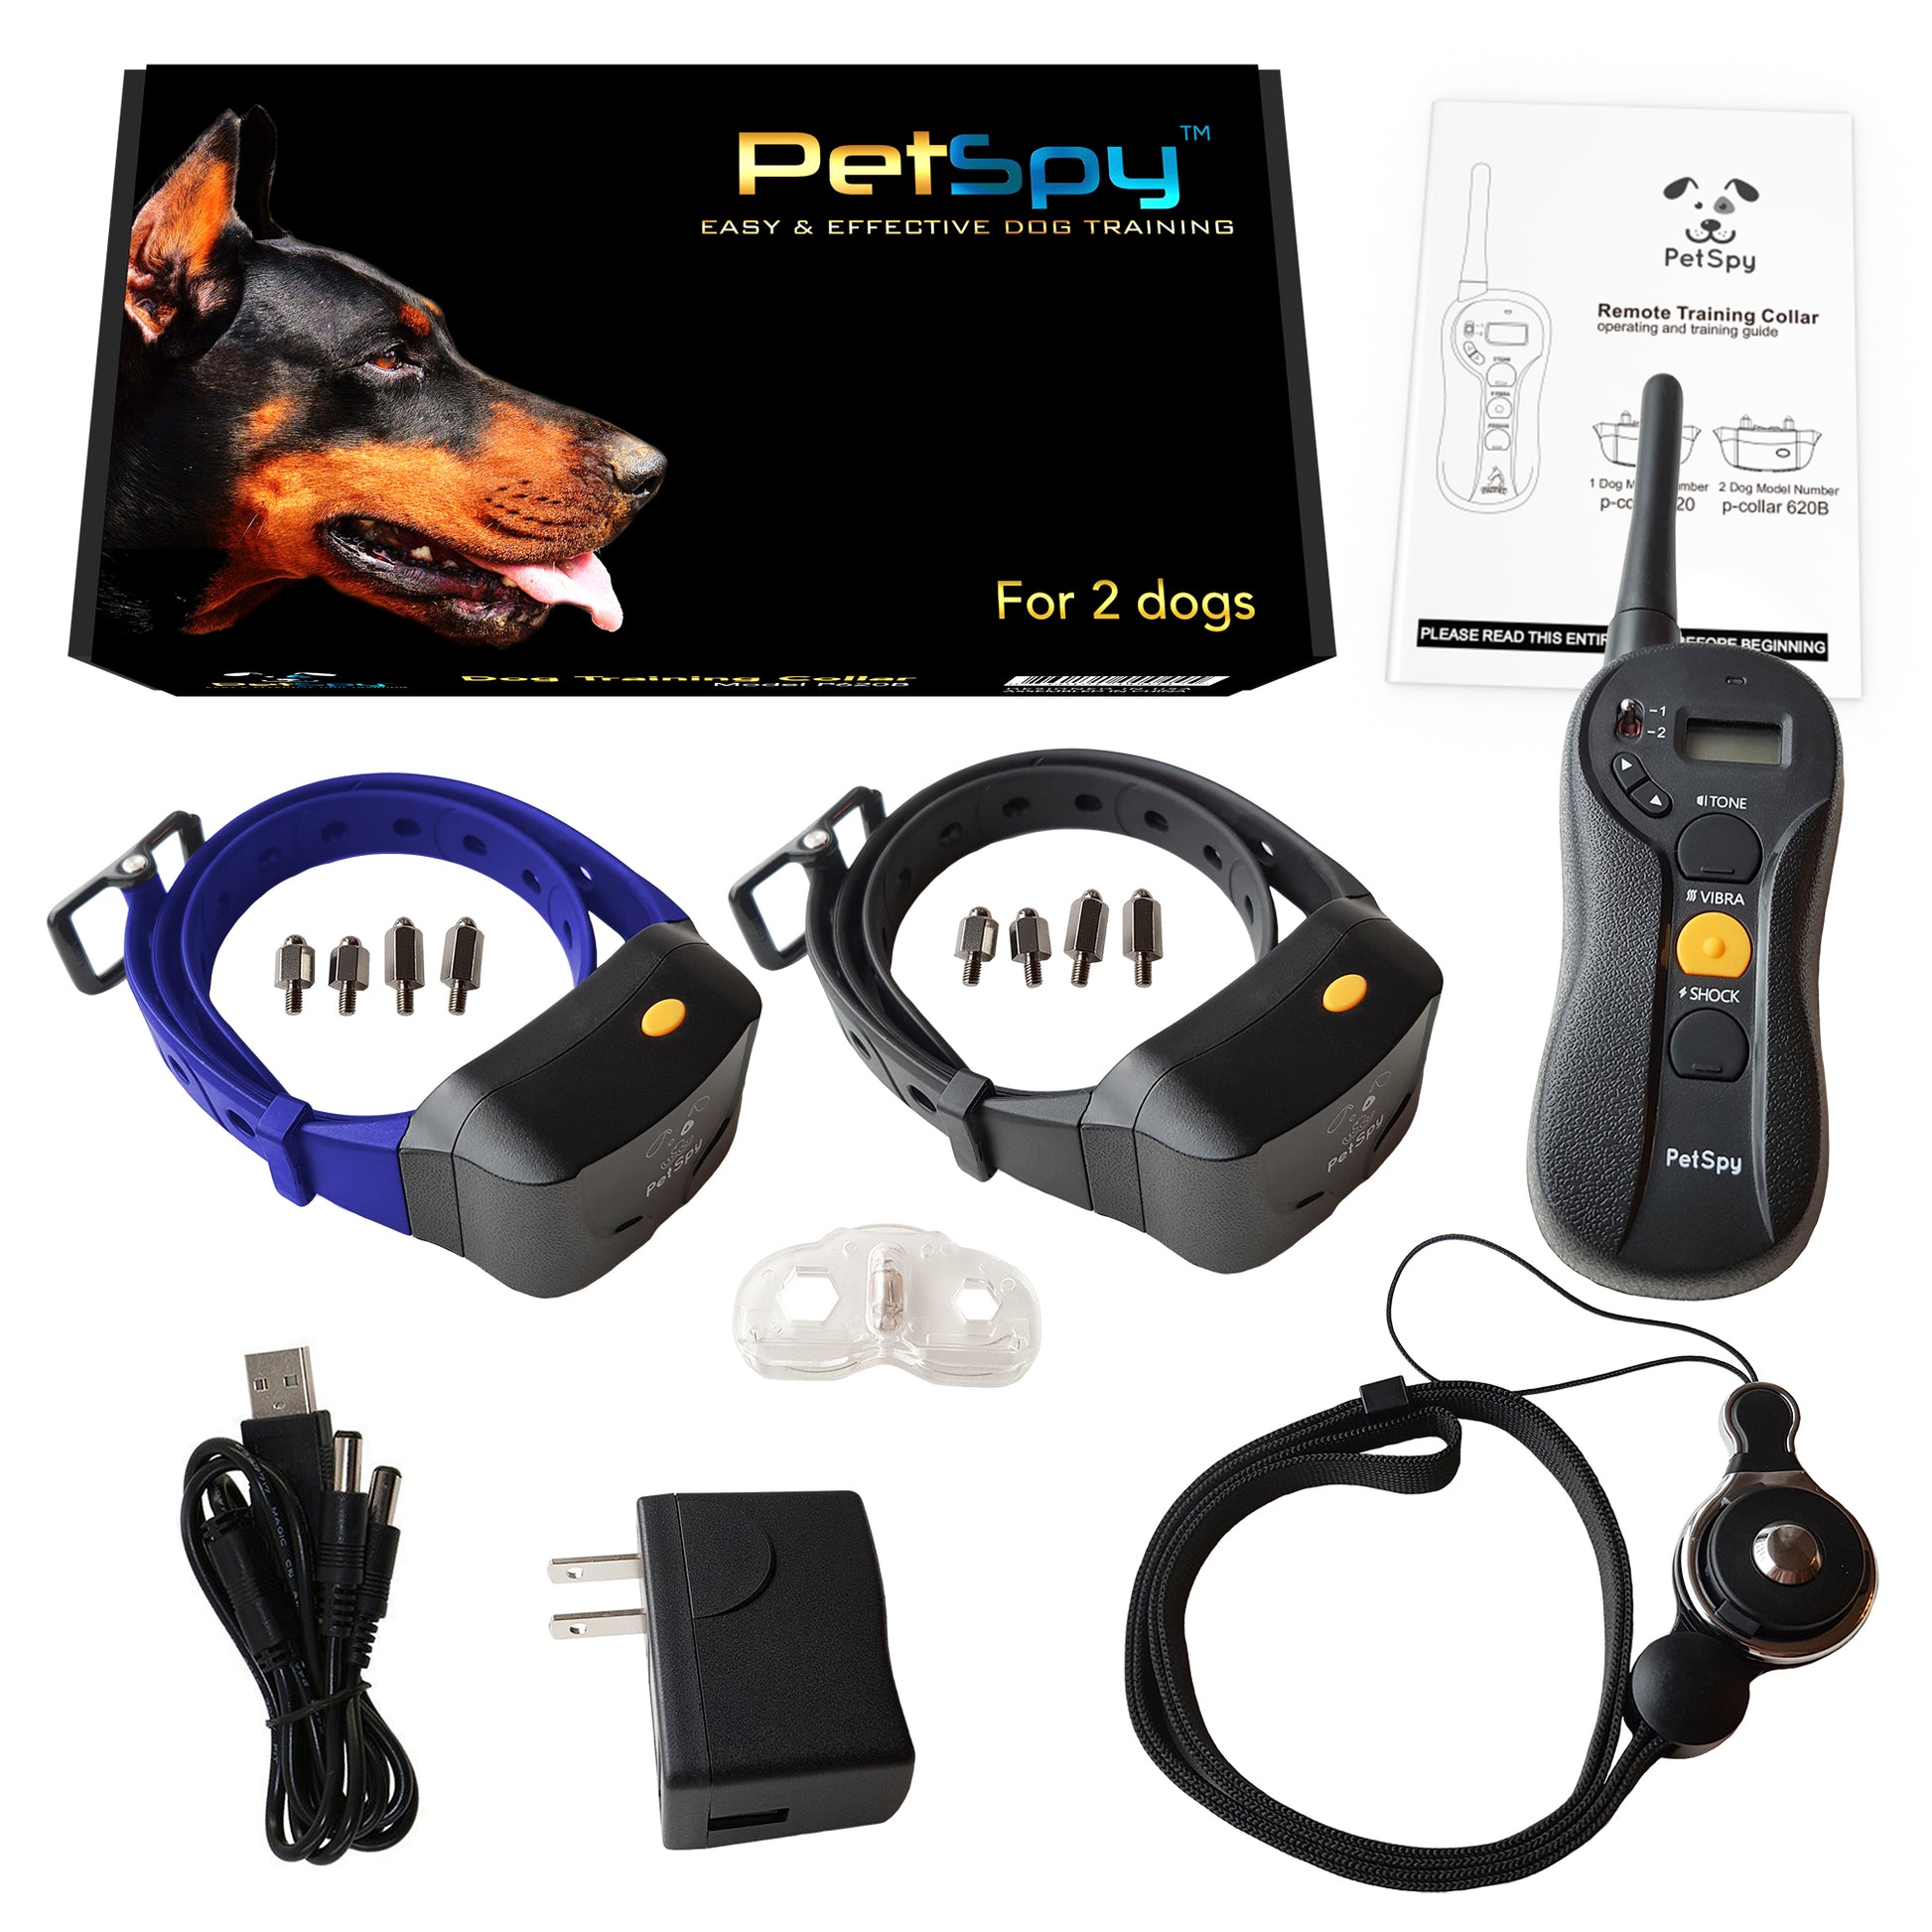 Customized Imprinted Animal Training Clickers